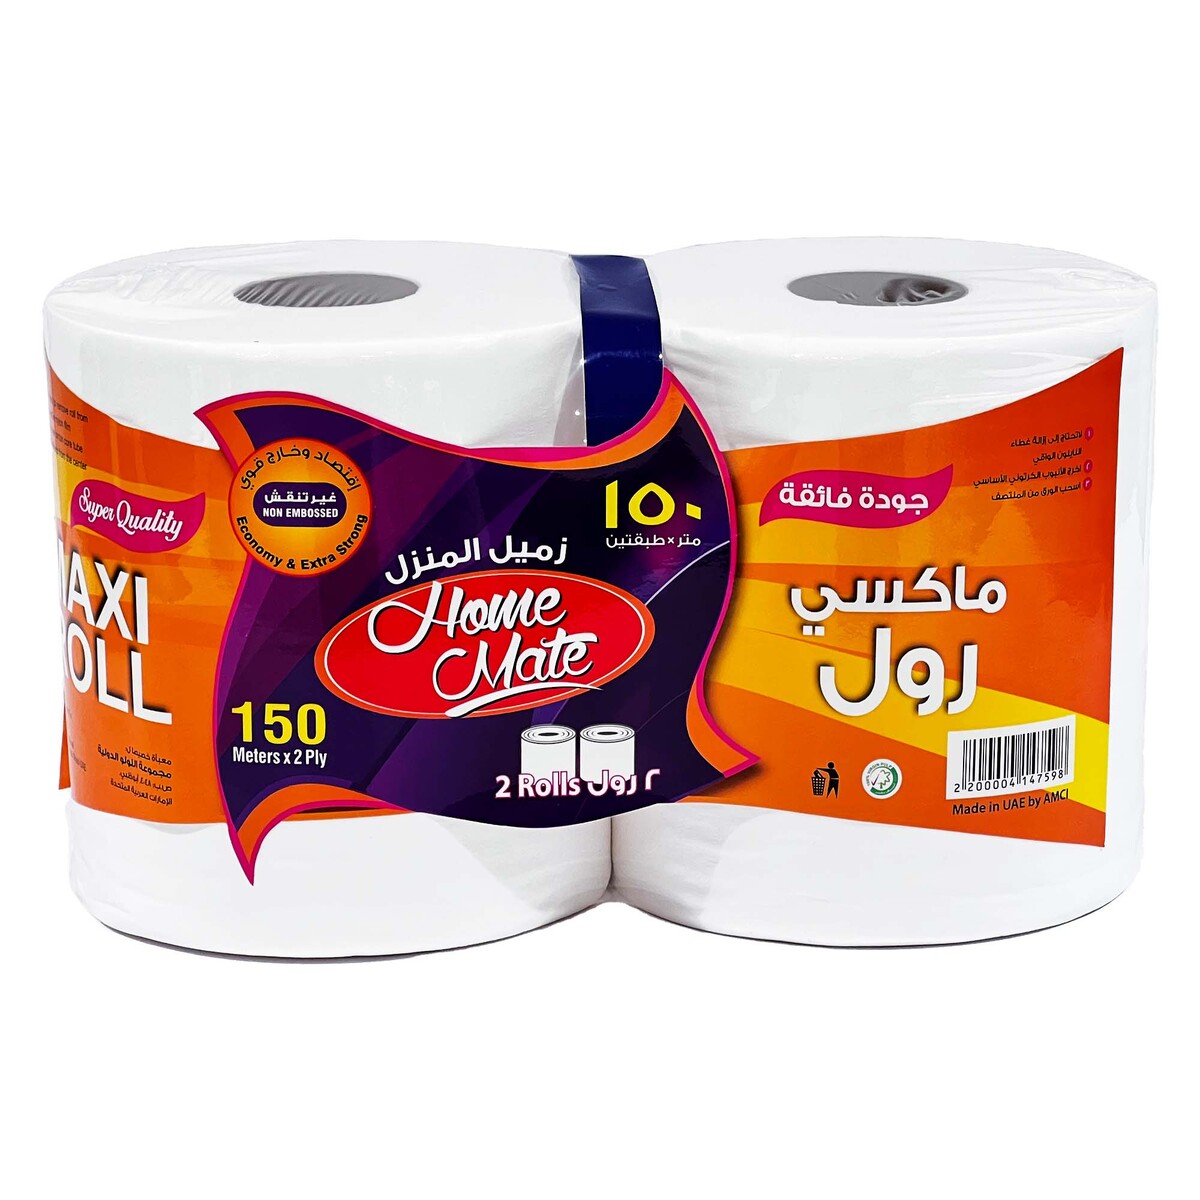 Home Mate Maxi Roll 2ply 2 x 150metre